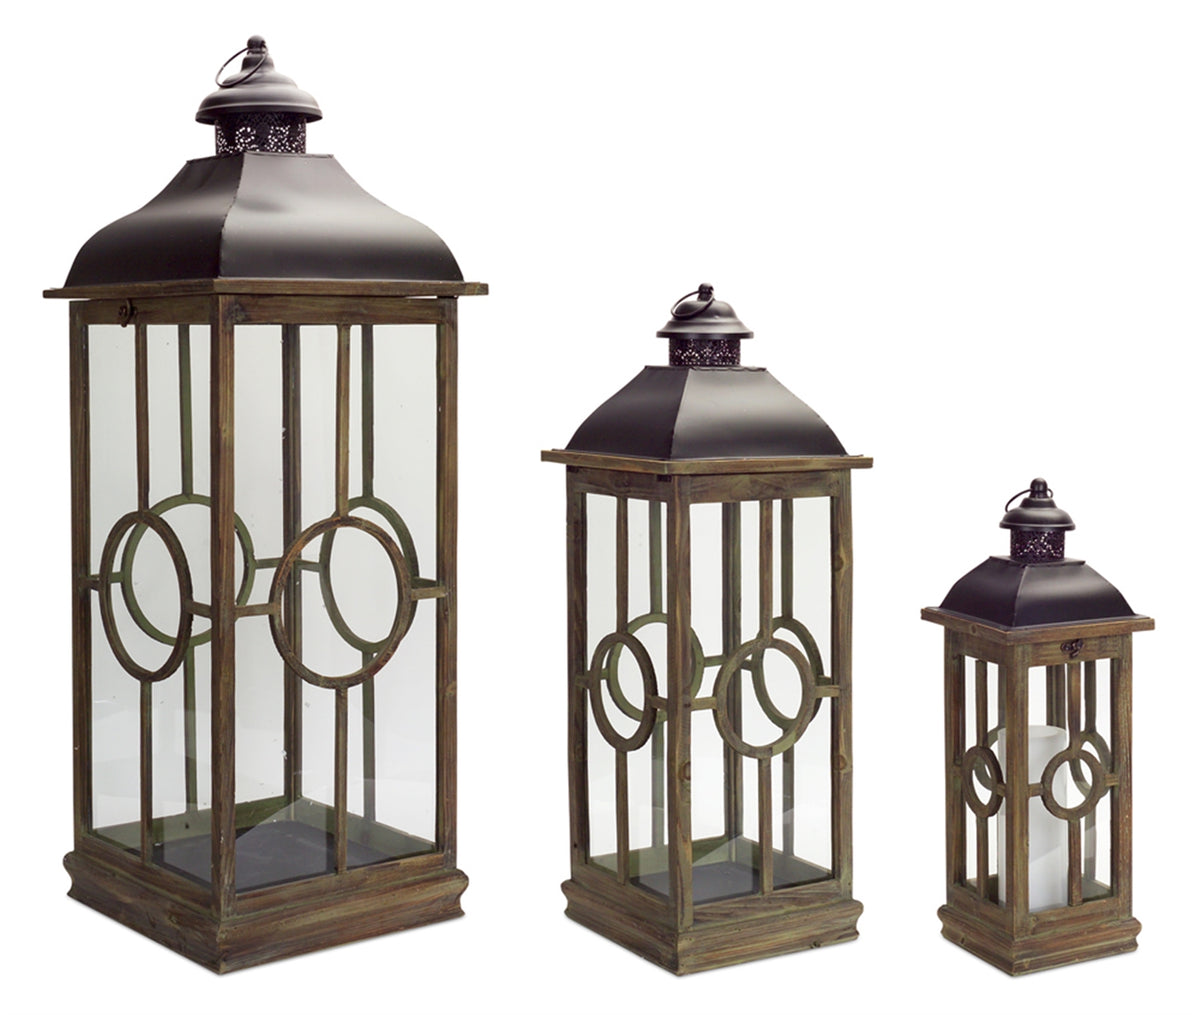 Set of 3 Candle Lanterns, 22", 30" and 40" tall